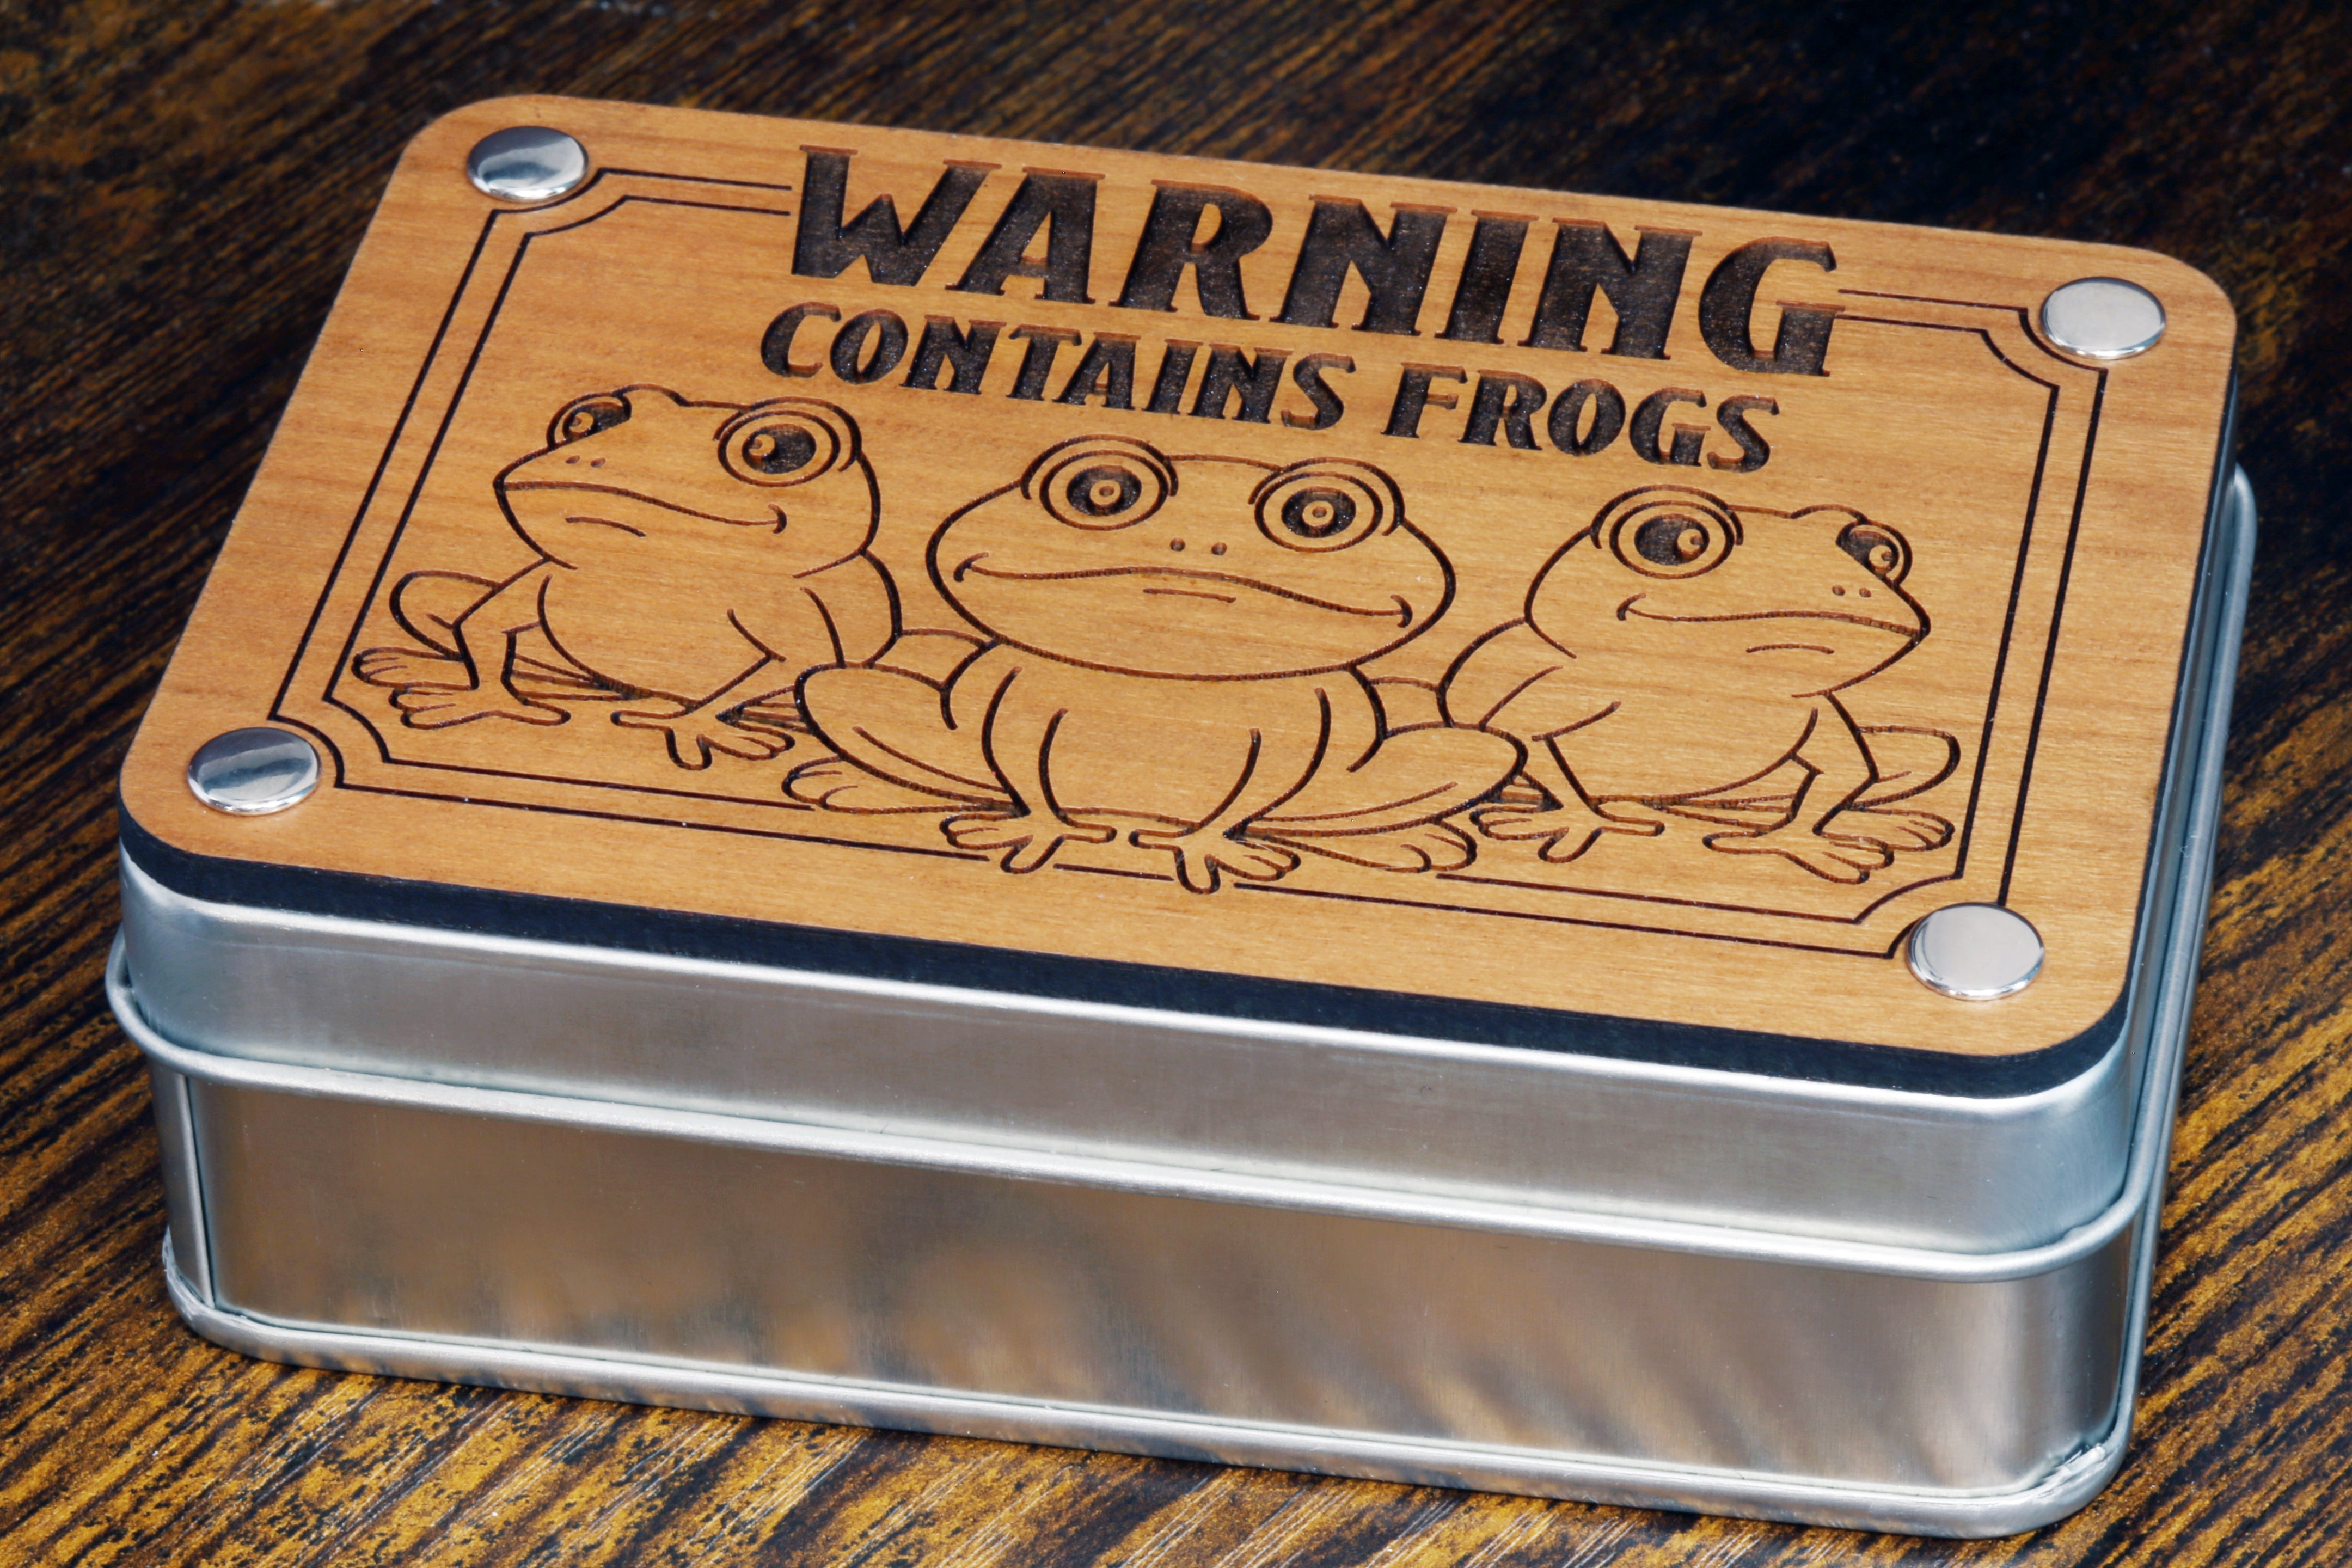 Warning ! Contains frogs dice set with metal box